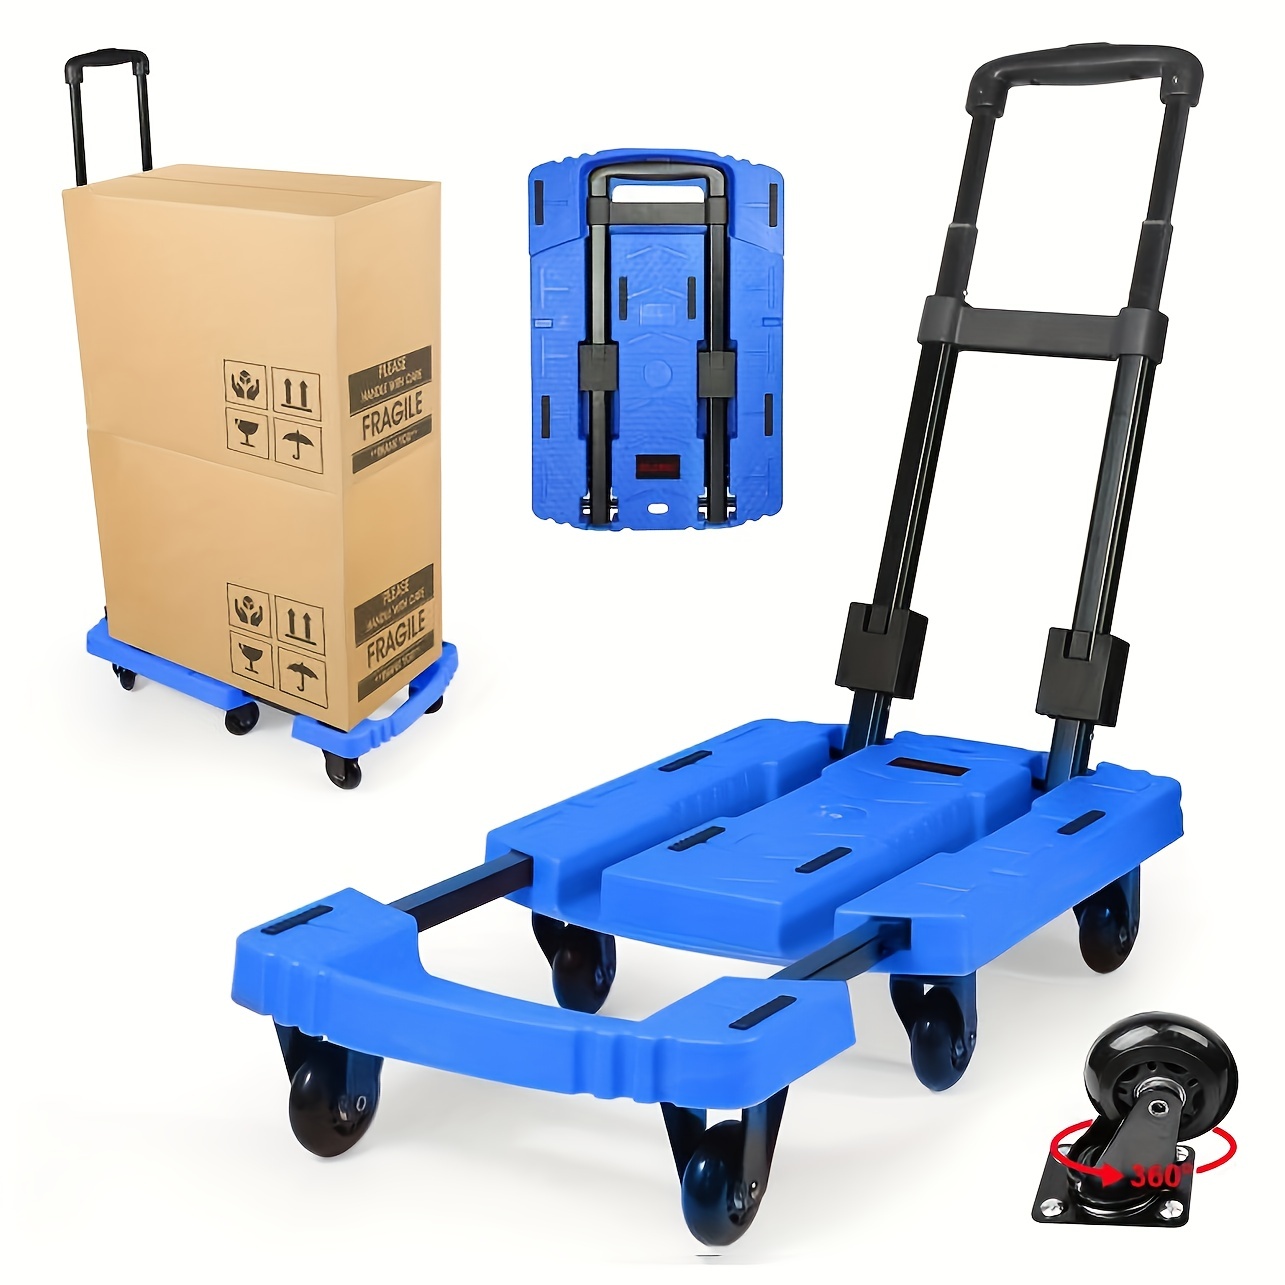 SELORSS Folding Hand Truck, 530 lbs Heavy Duty Luggage Cart, Foldable Dolly Cart for Moving, Utility Dolly Platform Cart with 6 Wheels for Travel